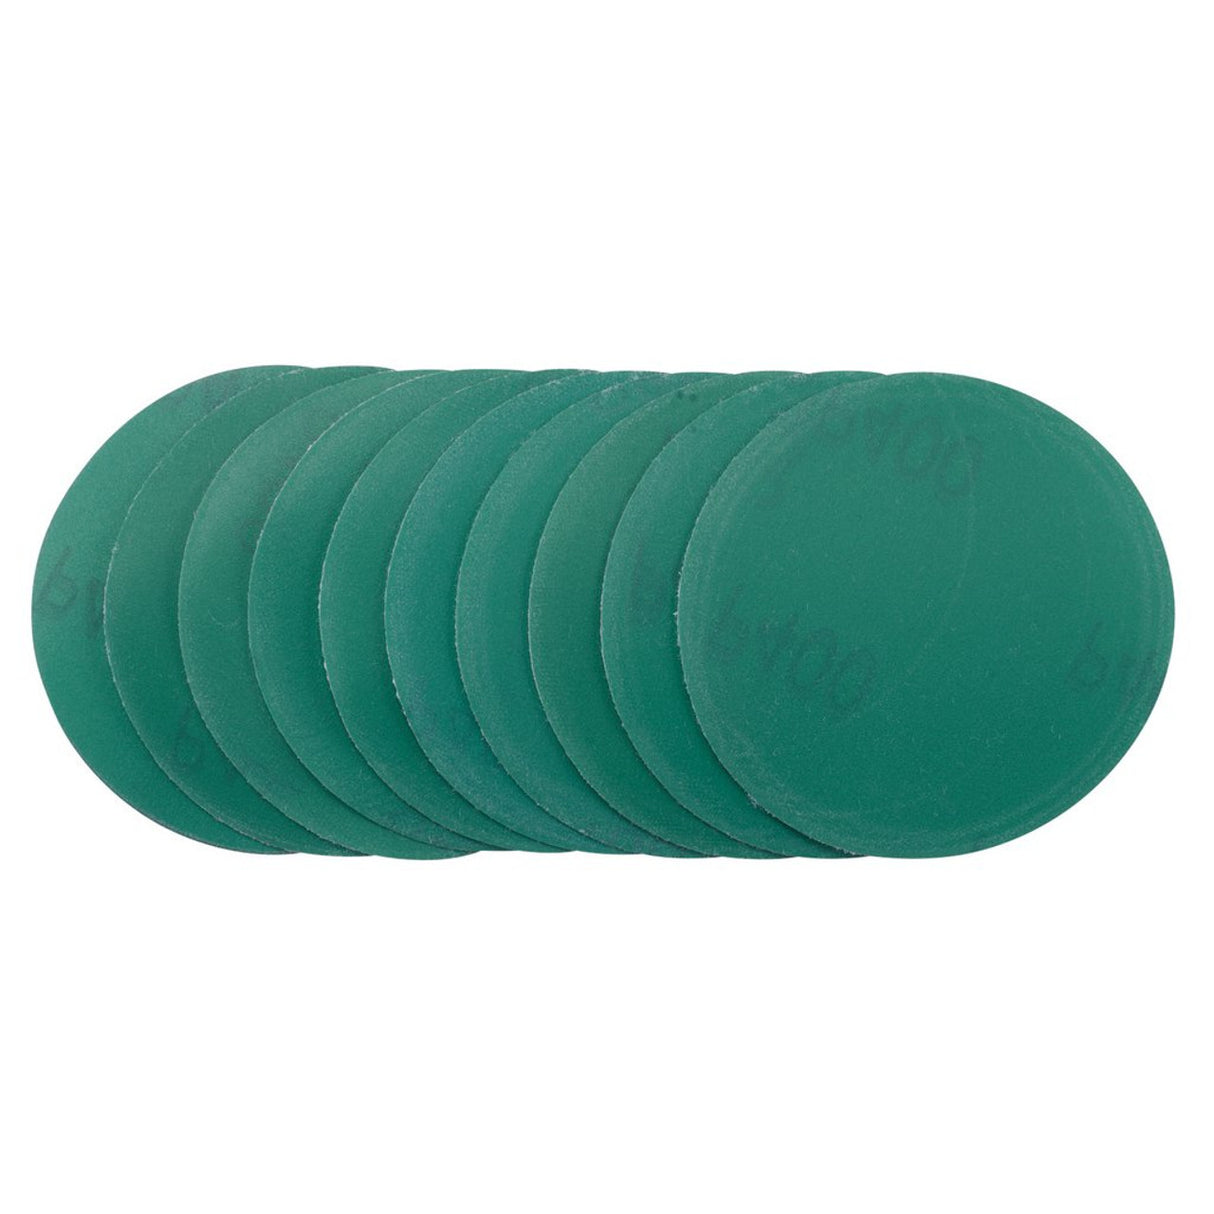 Draper Tools Wet And Dry Sanding Discs With Hook And Loop, 75mm, 400 Grit (Pack Of 10)